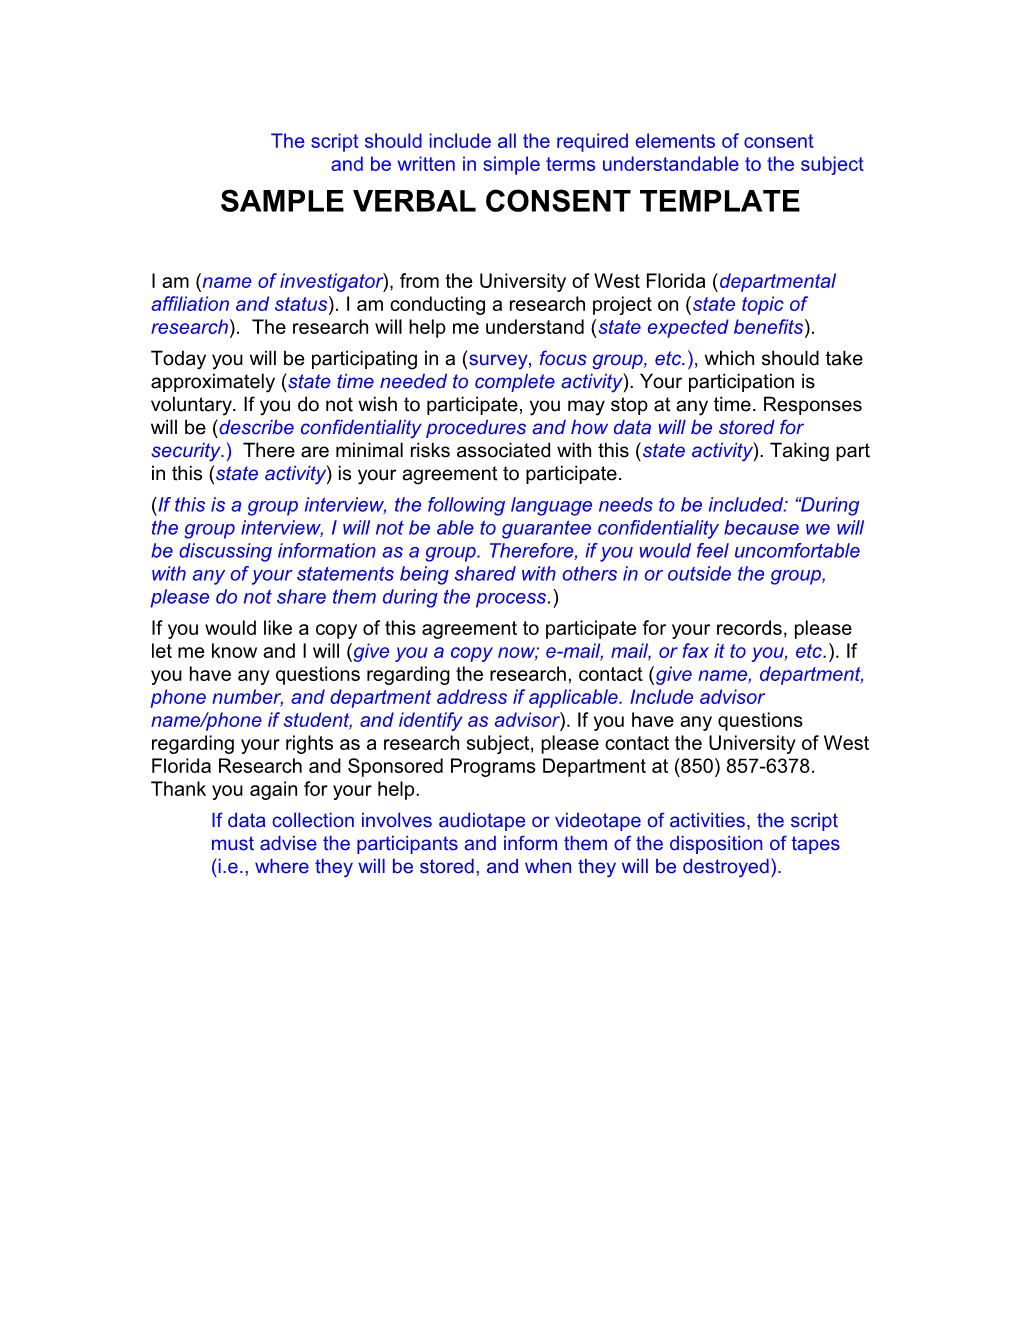 Sample Verbal Consent Template